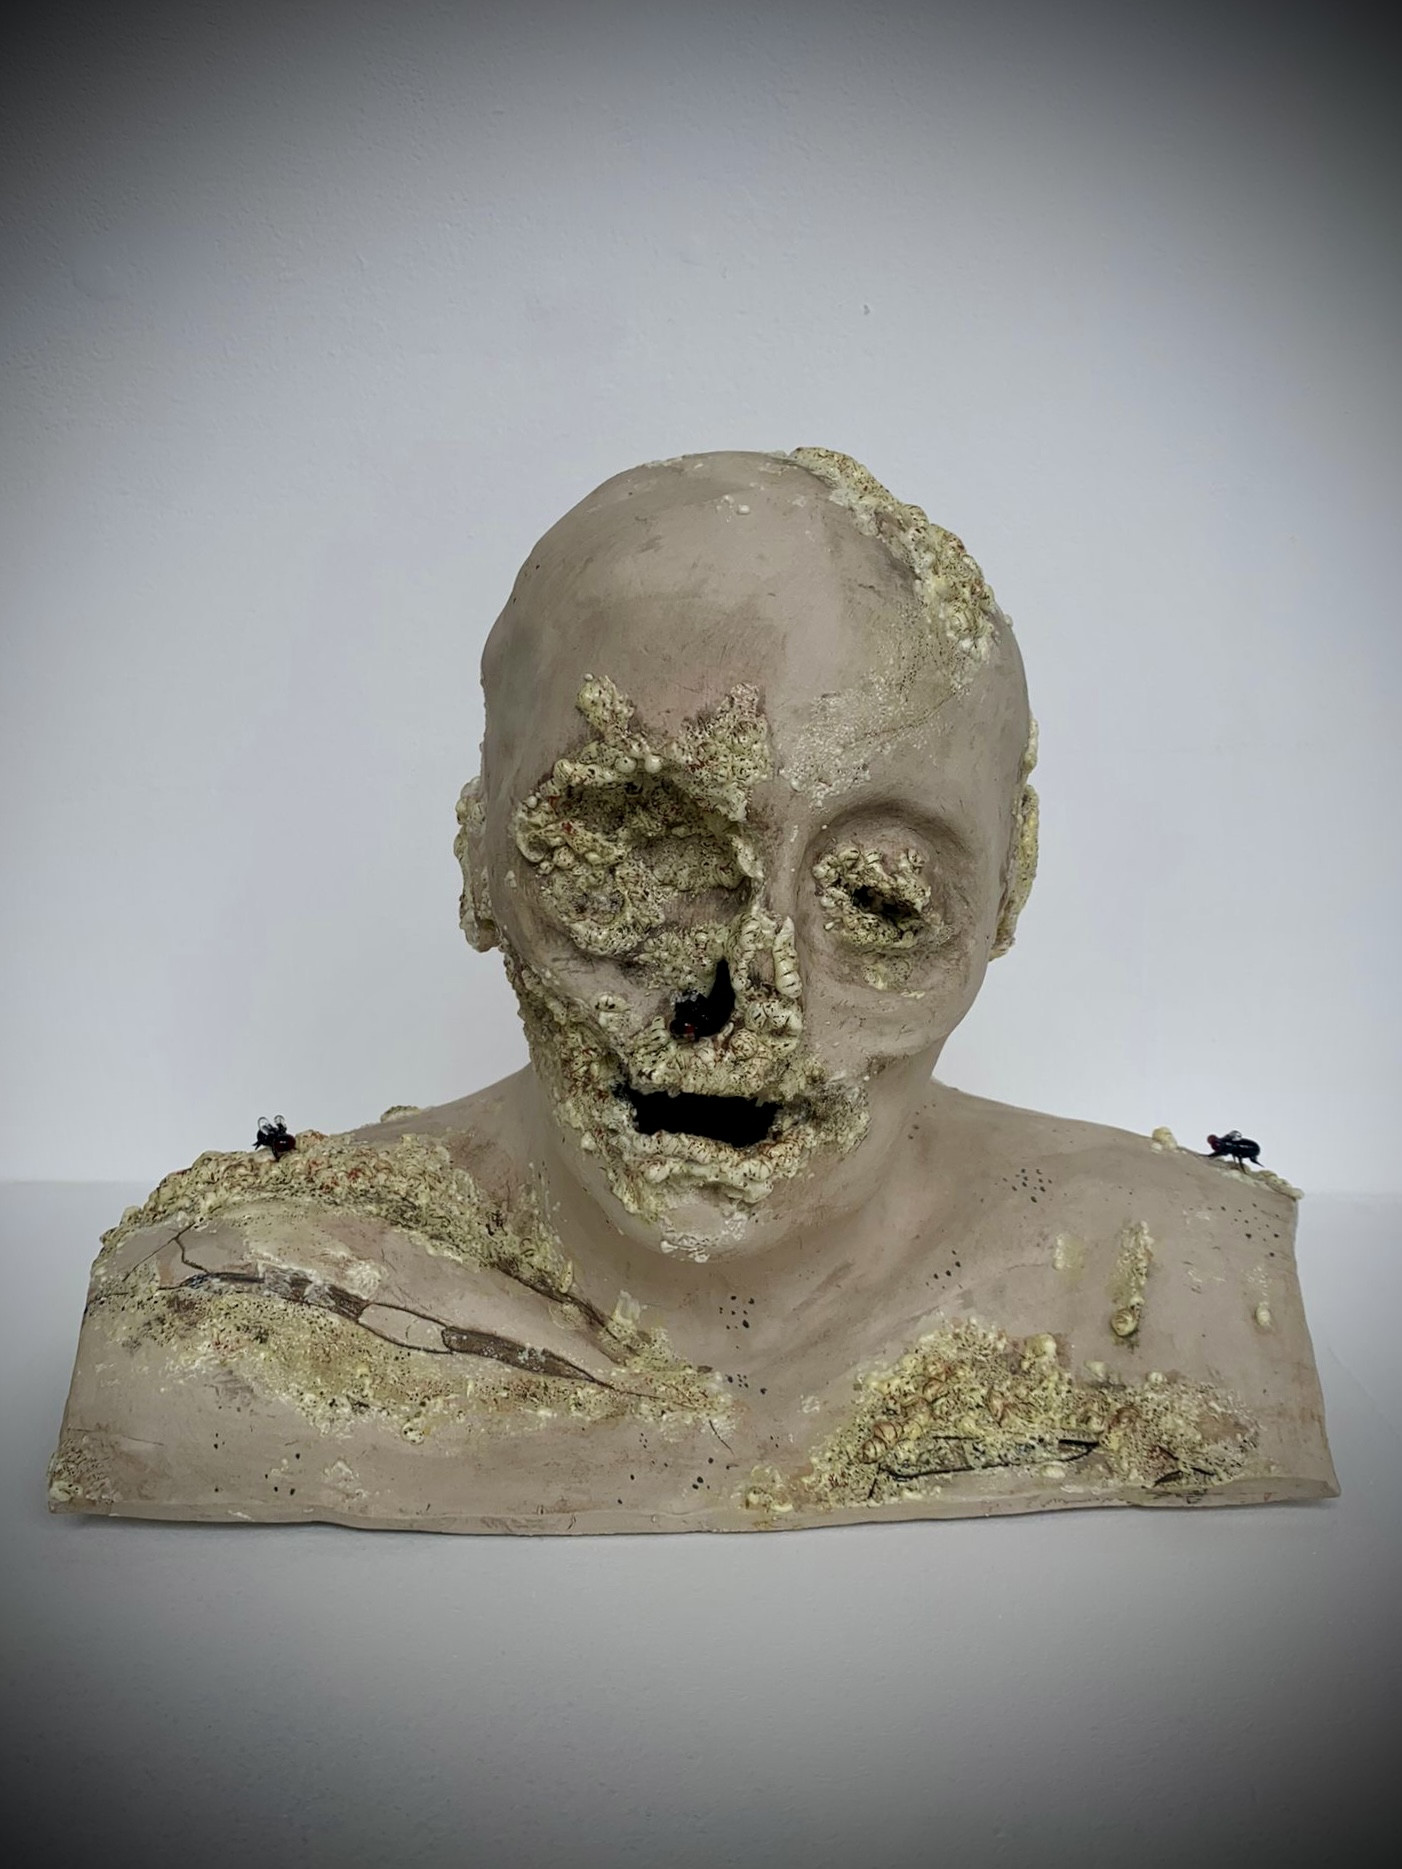 *The Natural Law – Advanced Decay*, ceramic, expanding foam, glass